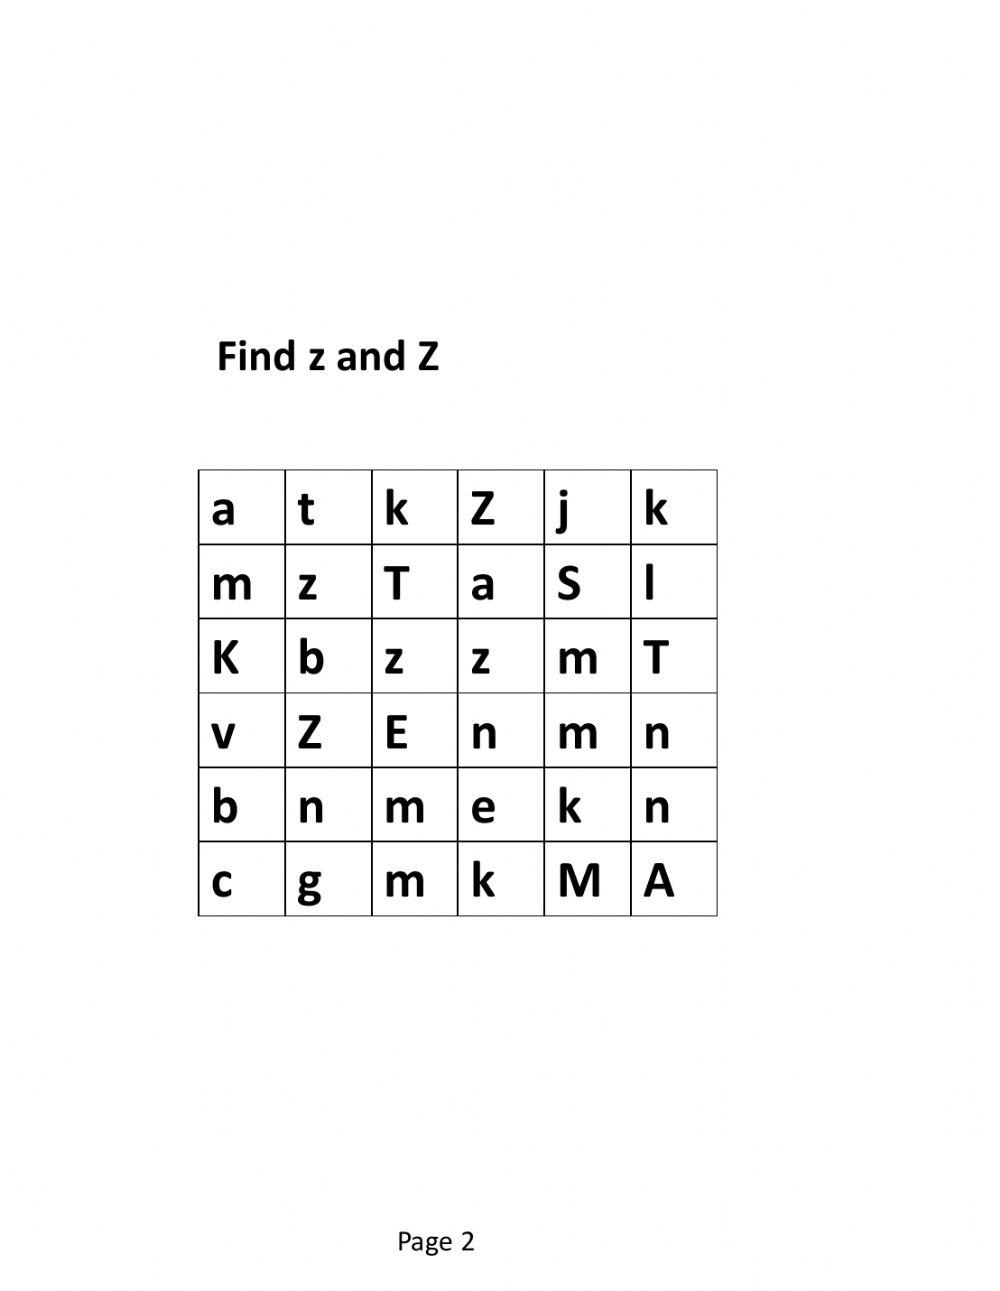 find (y and Y)(z and Z)